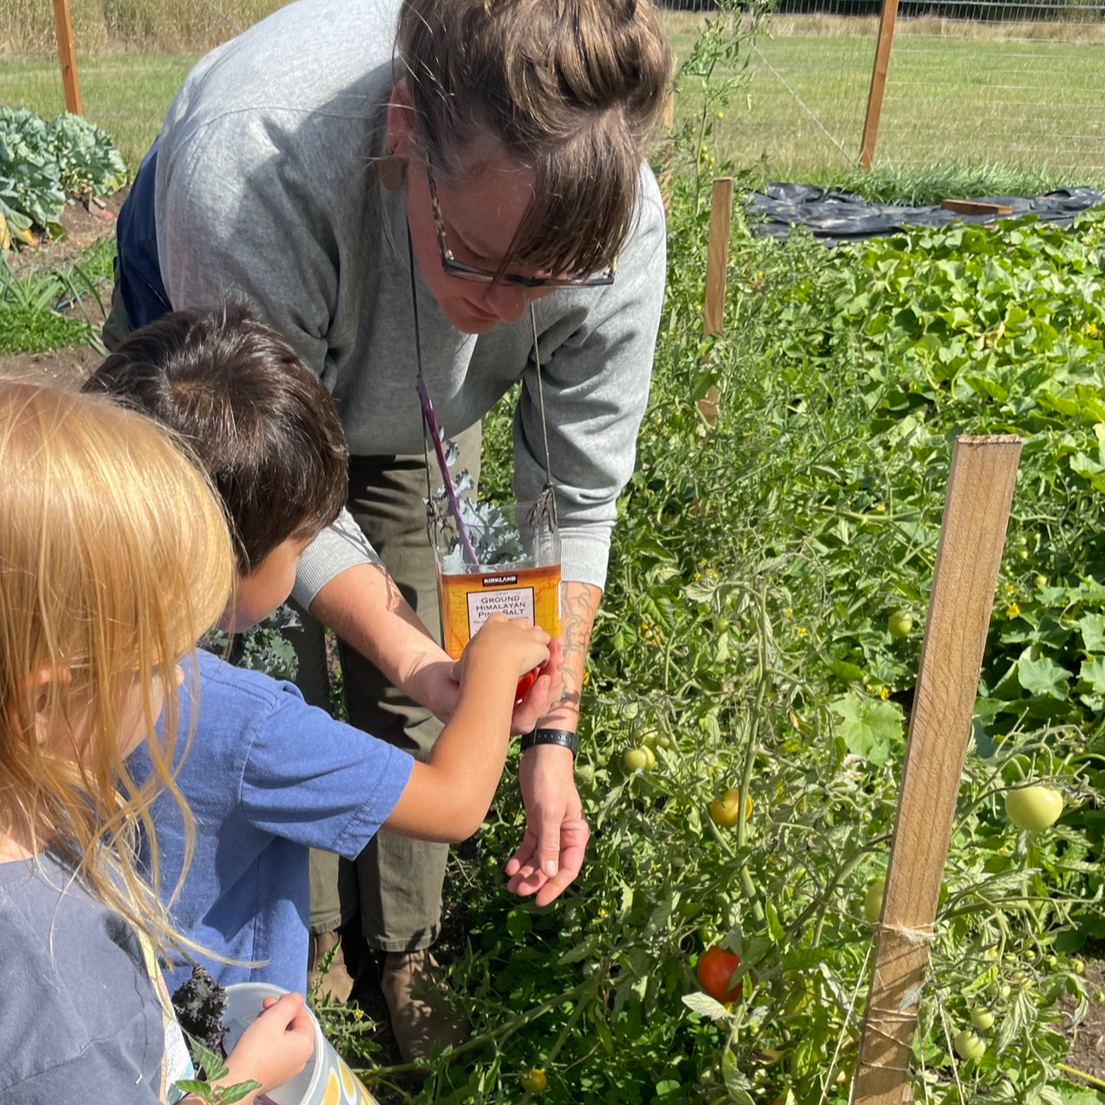 Martha Stephens helping two students pick cherry tomatoes.